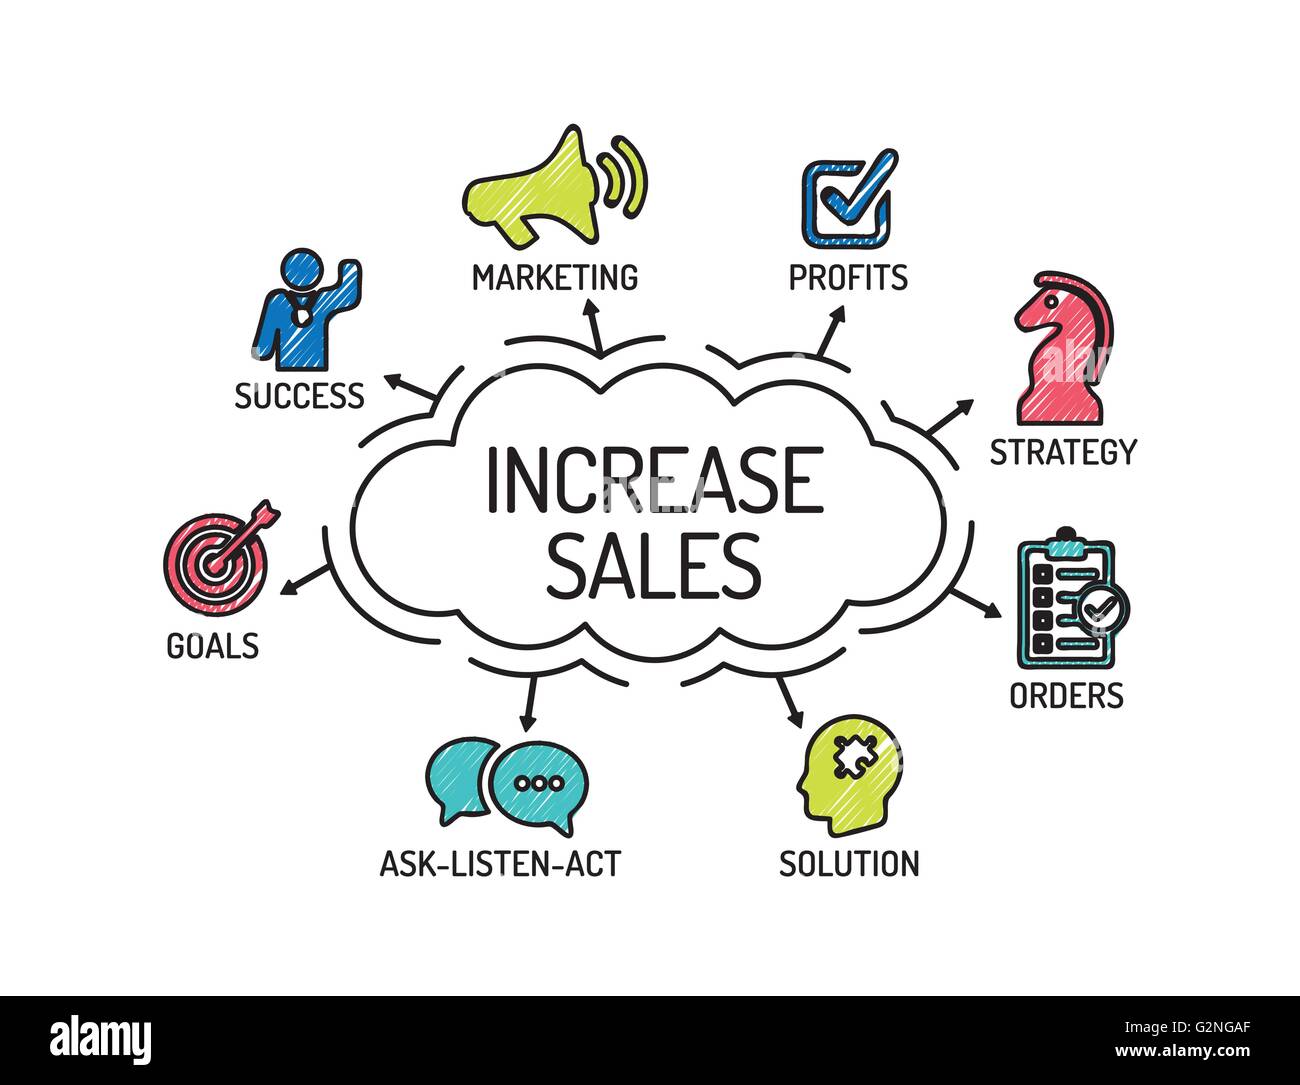 Increase Sales. Chart with keywords and icons. Sketch Stock Vector